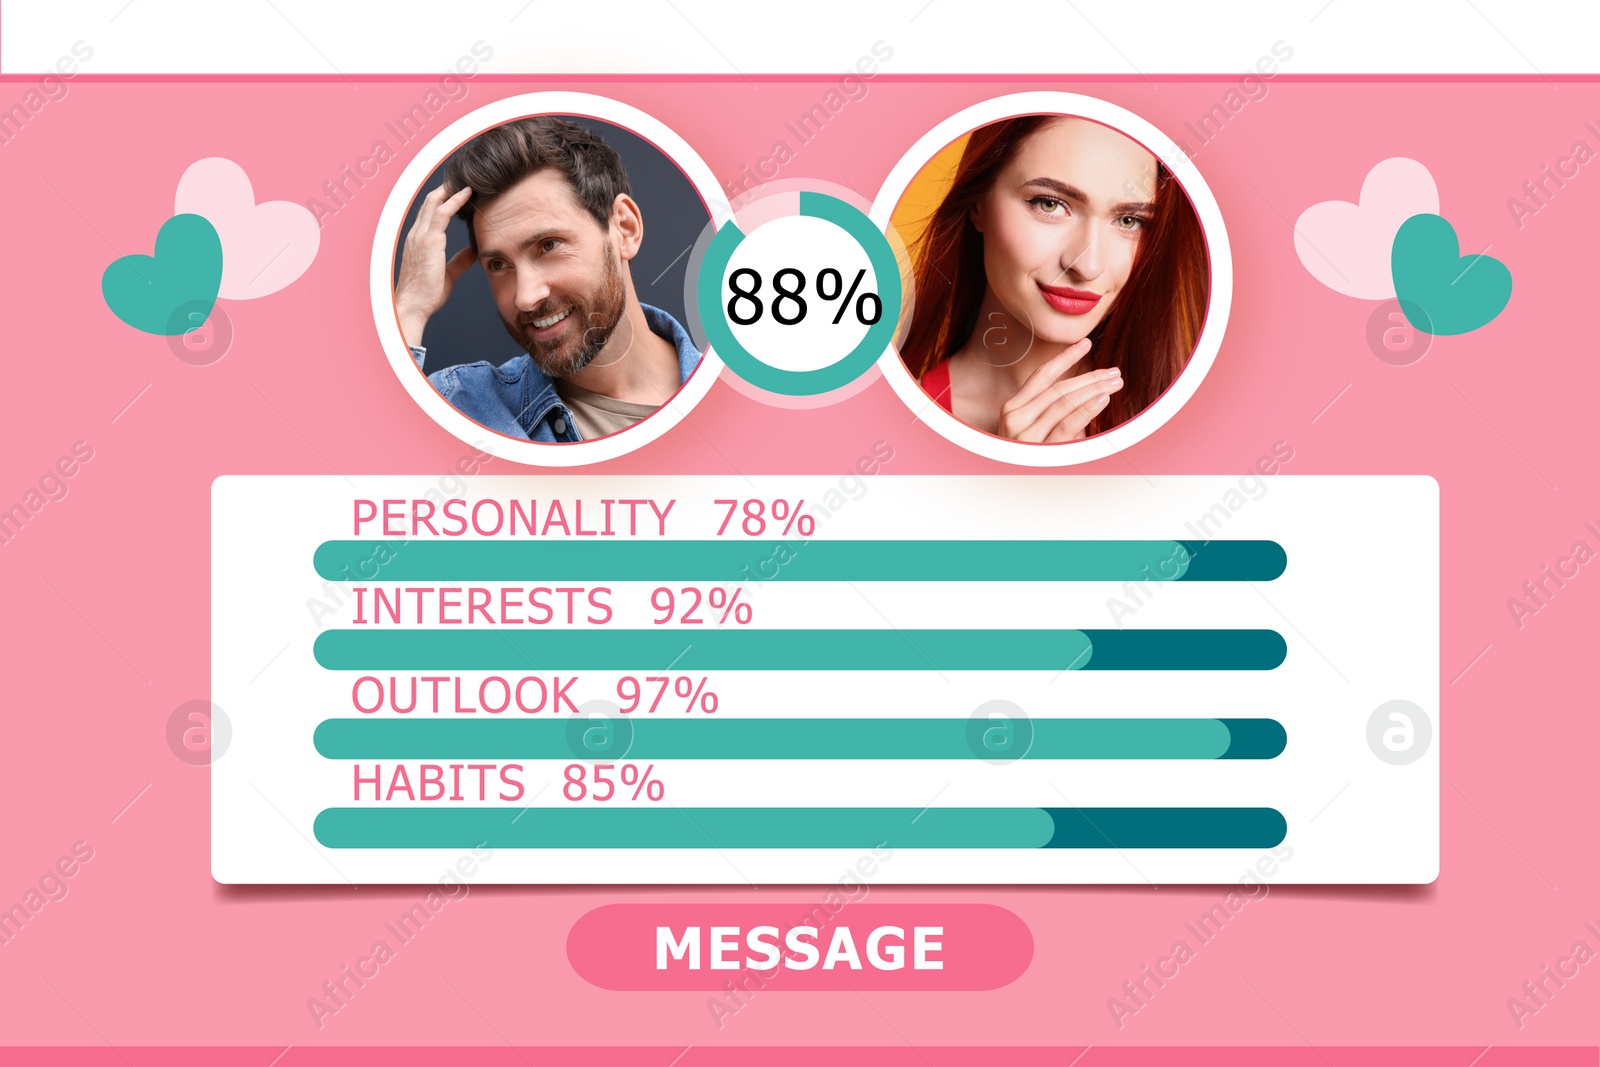 Image of Soulmate match. Dating site interface with photos of possible pair and data